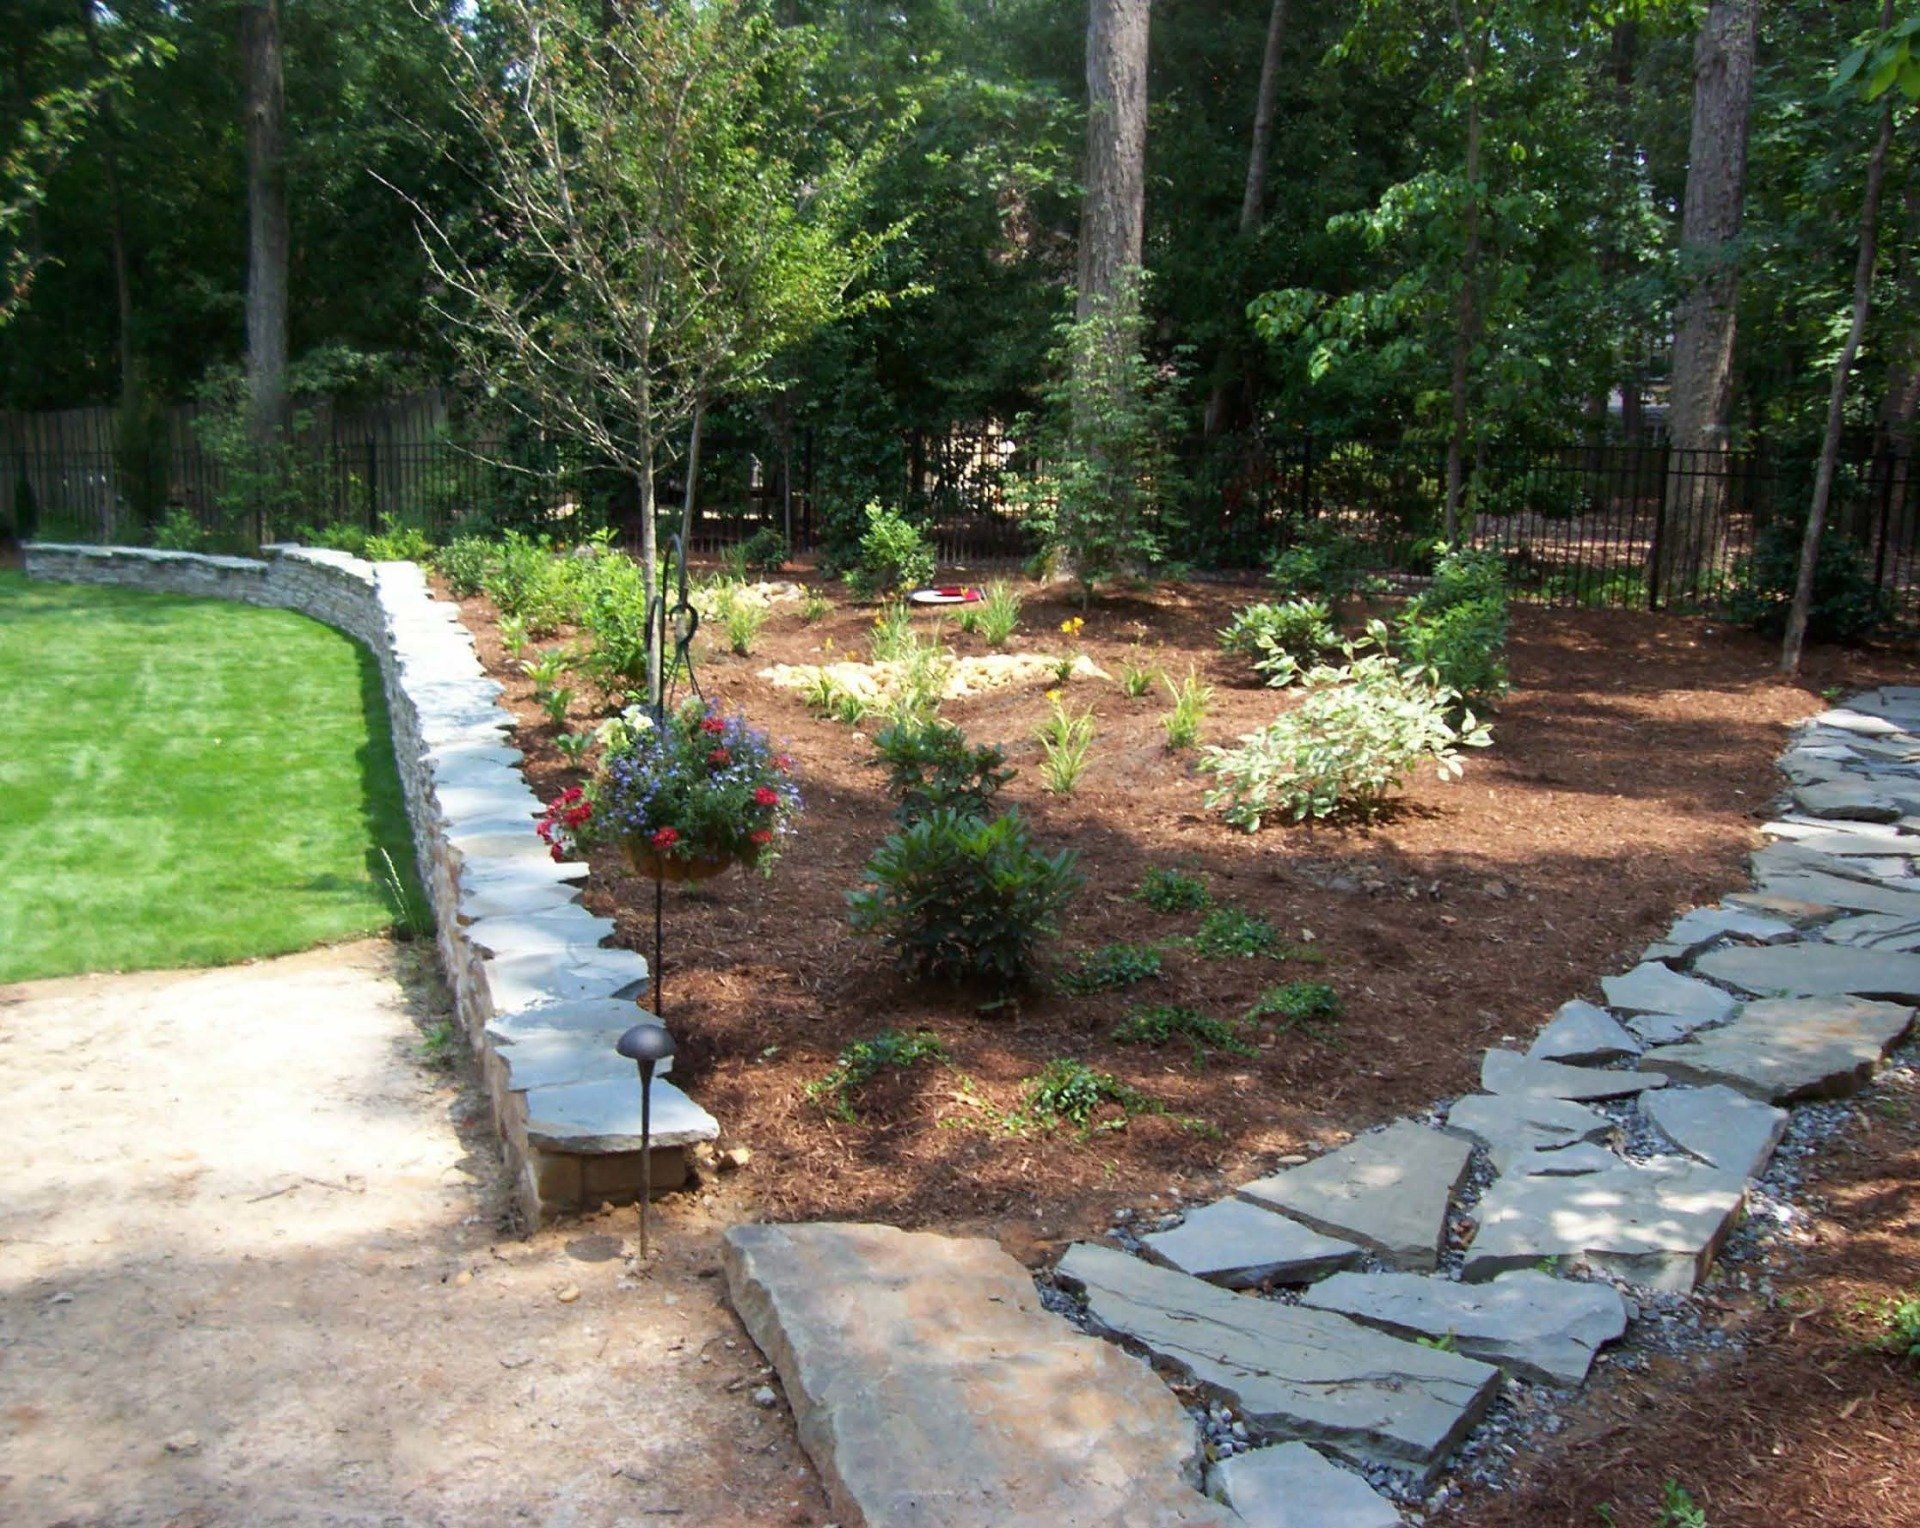 Remodeling — Simple Landscape With Plants And Grass in Shacklefords, VA